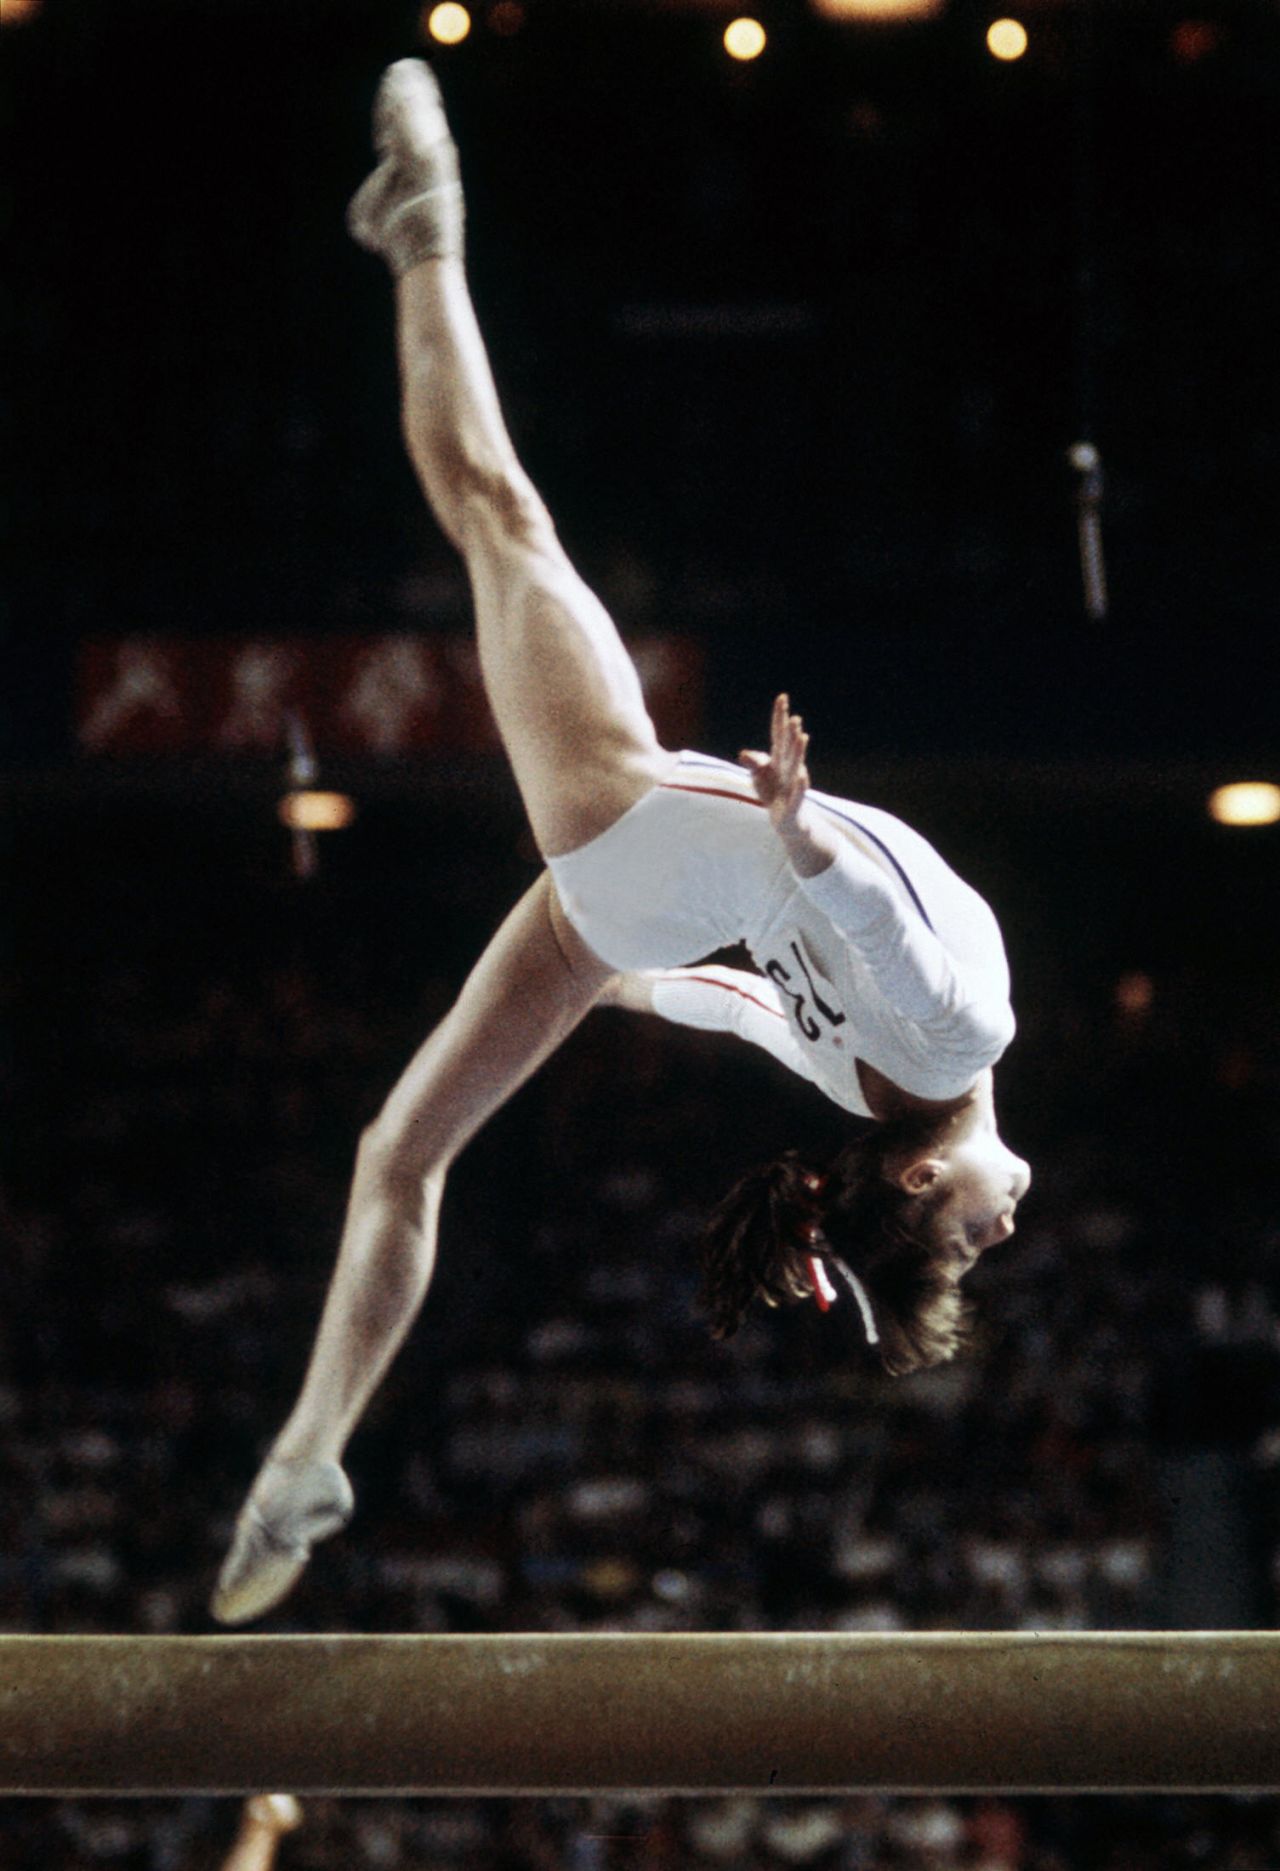 Comaneci was just 14 when she captured the imagination of sports fans around the world with her exploits in Canada.